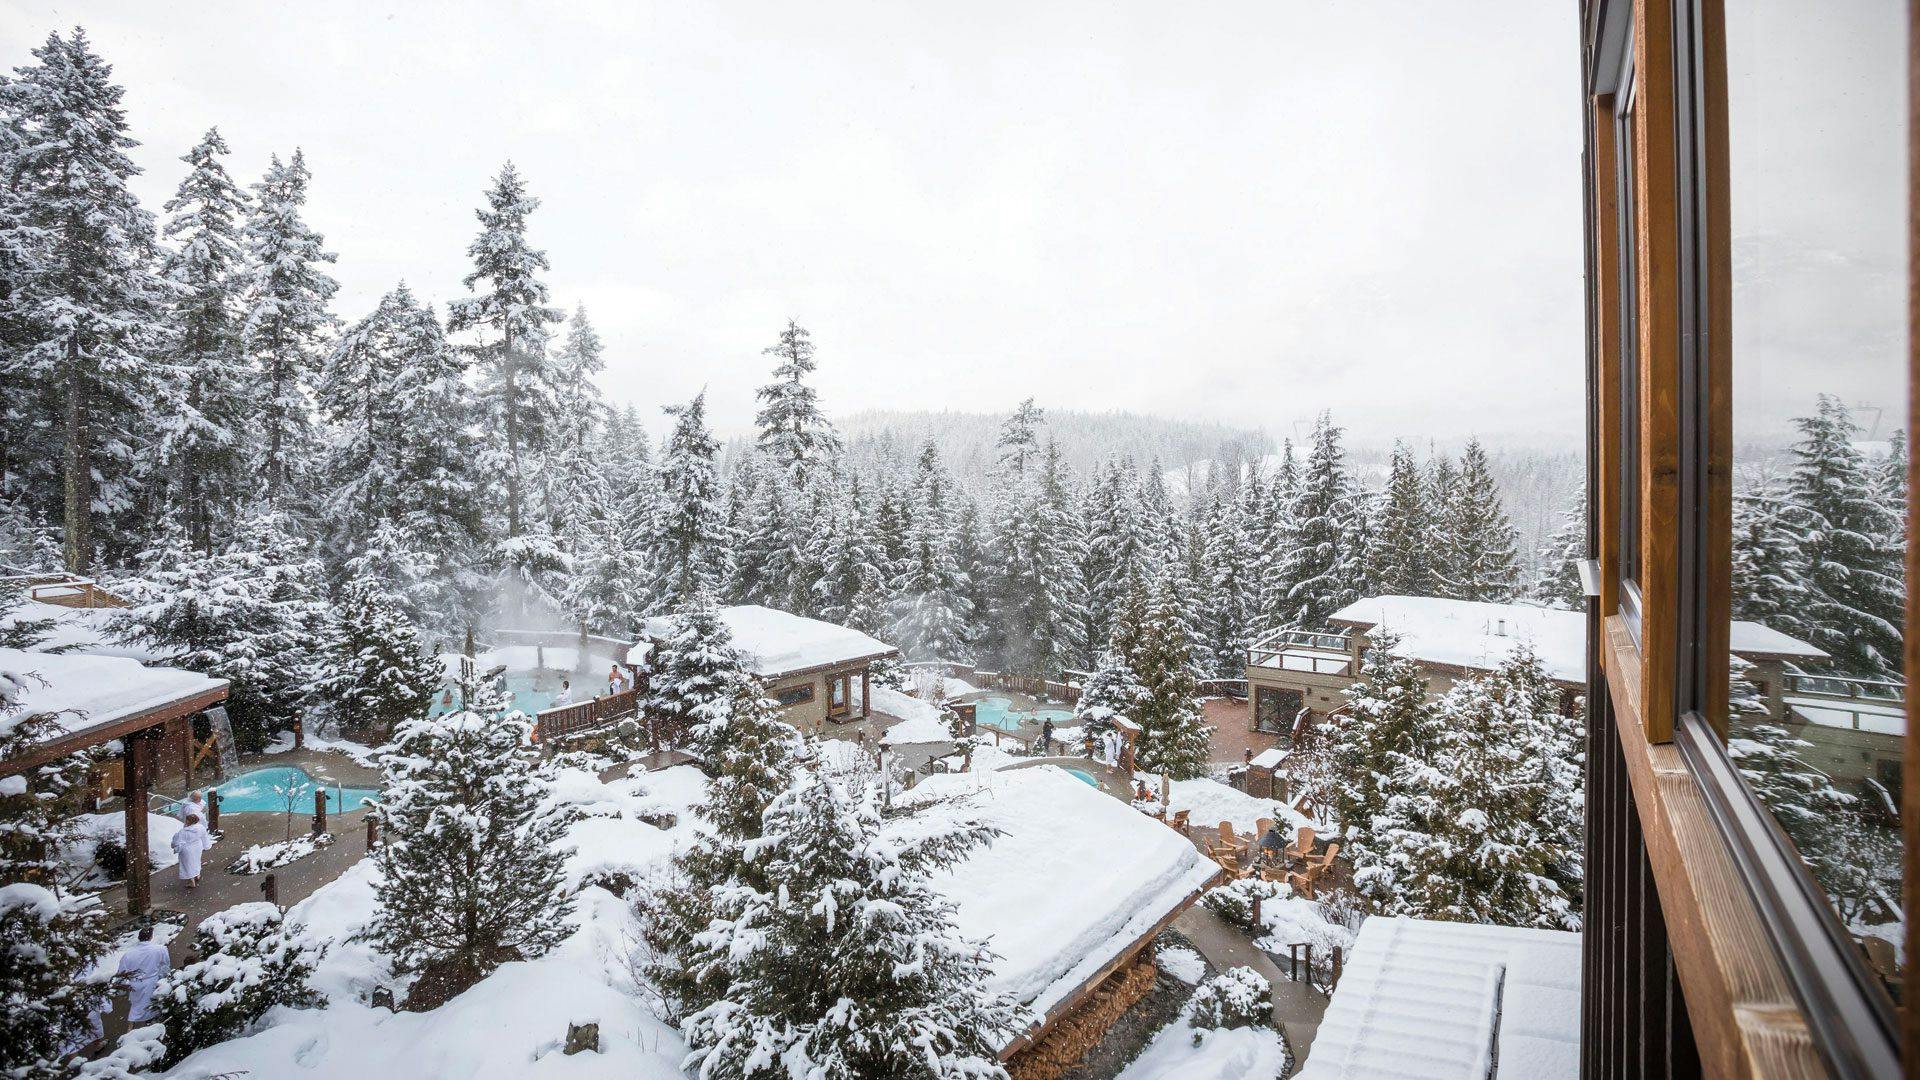 Scandinave Spa Whistler covered in deep snow.